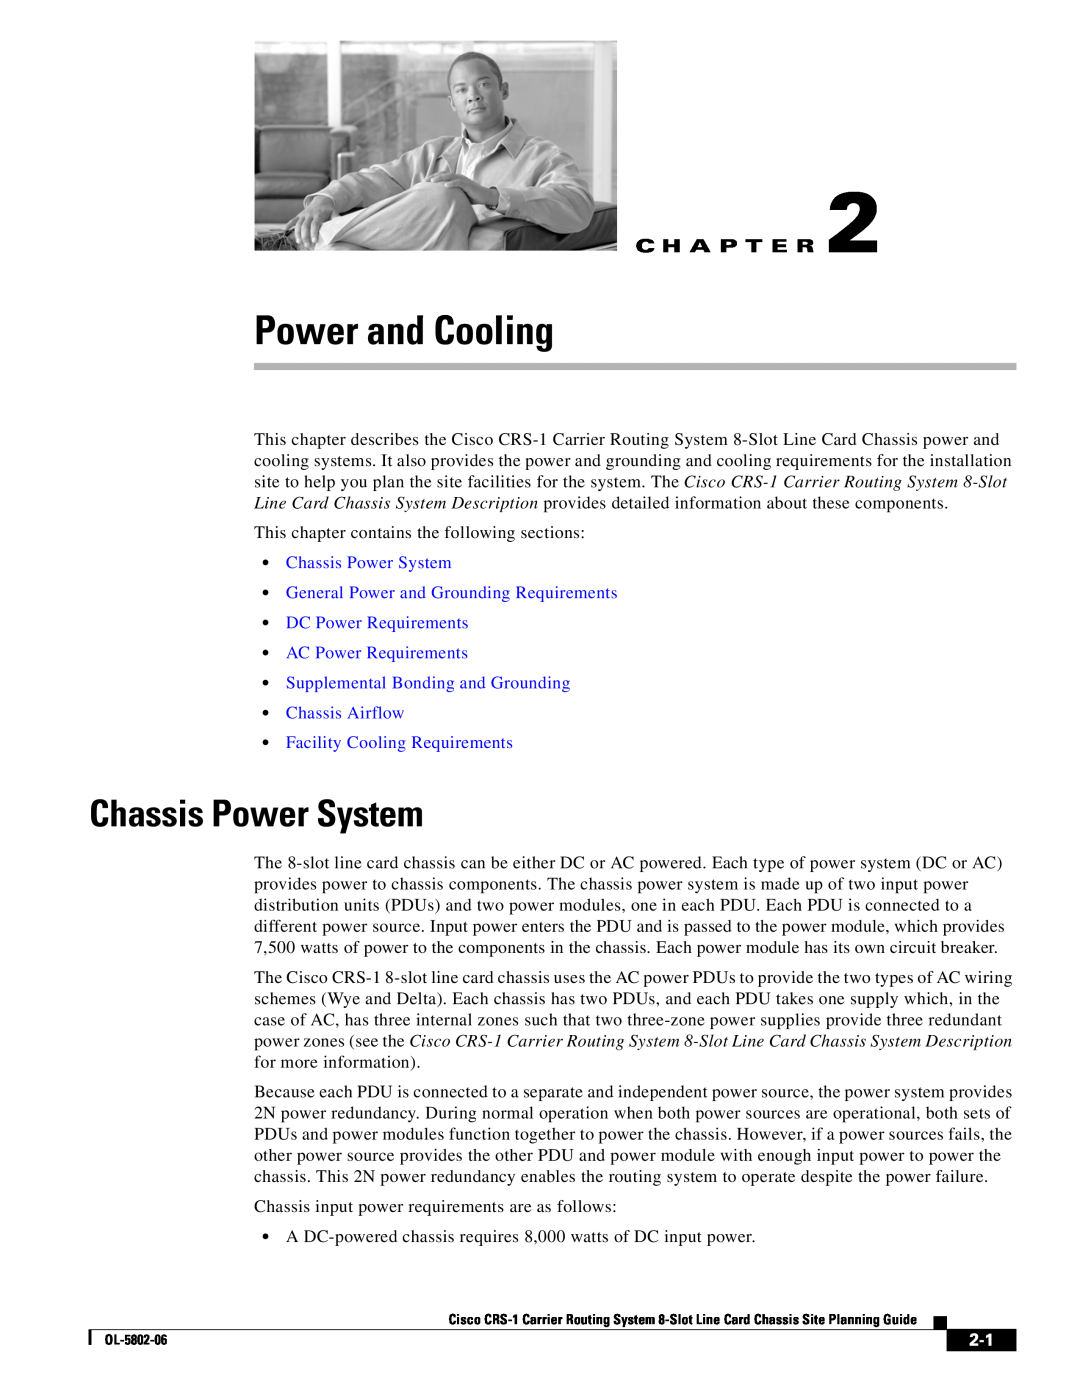 Cisco Systems CRS-1 Power and Cooling, Chassis Power System General Power and Grounding Requirements, C H A P T E R 